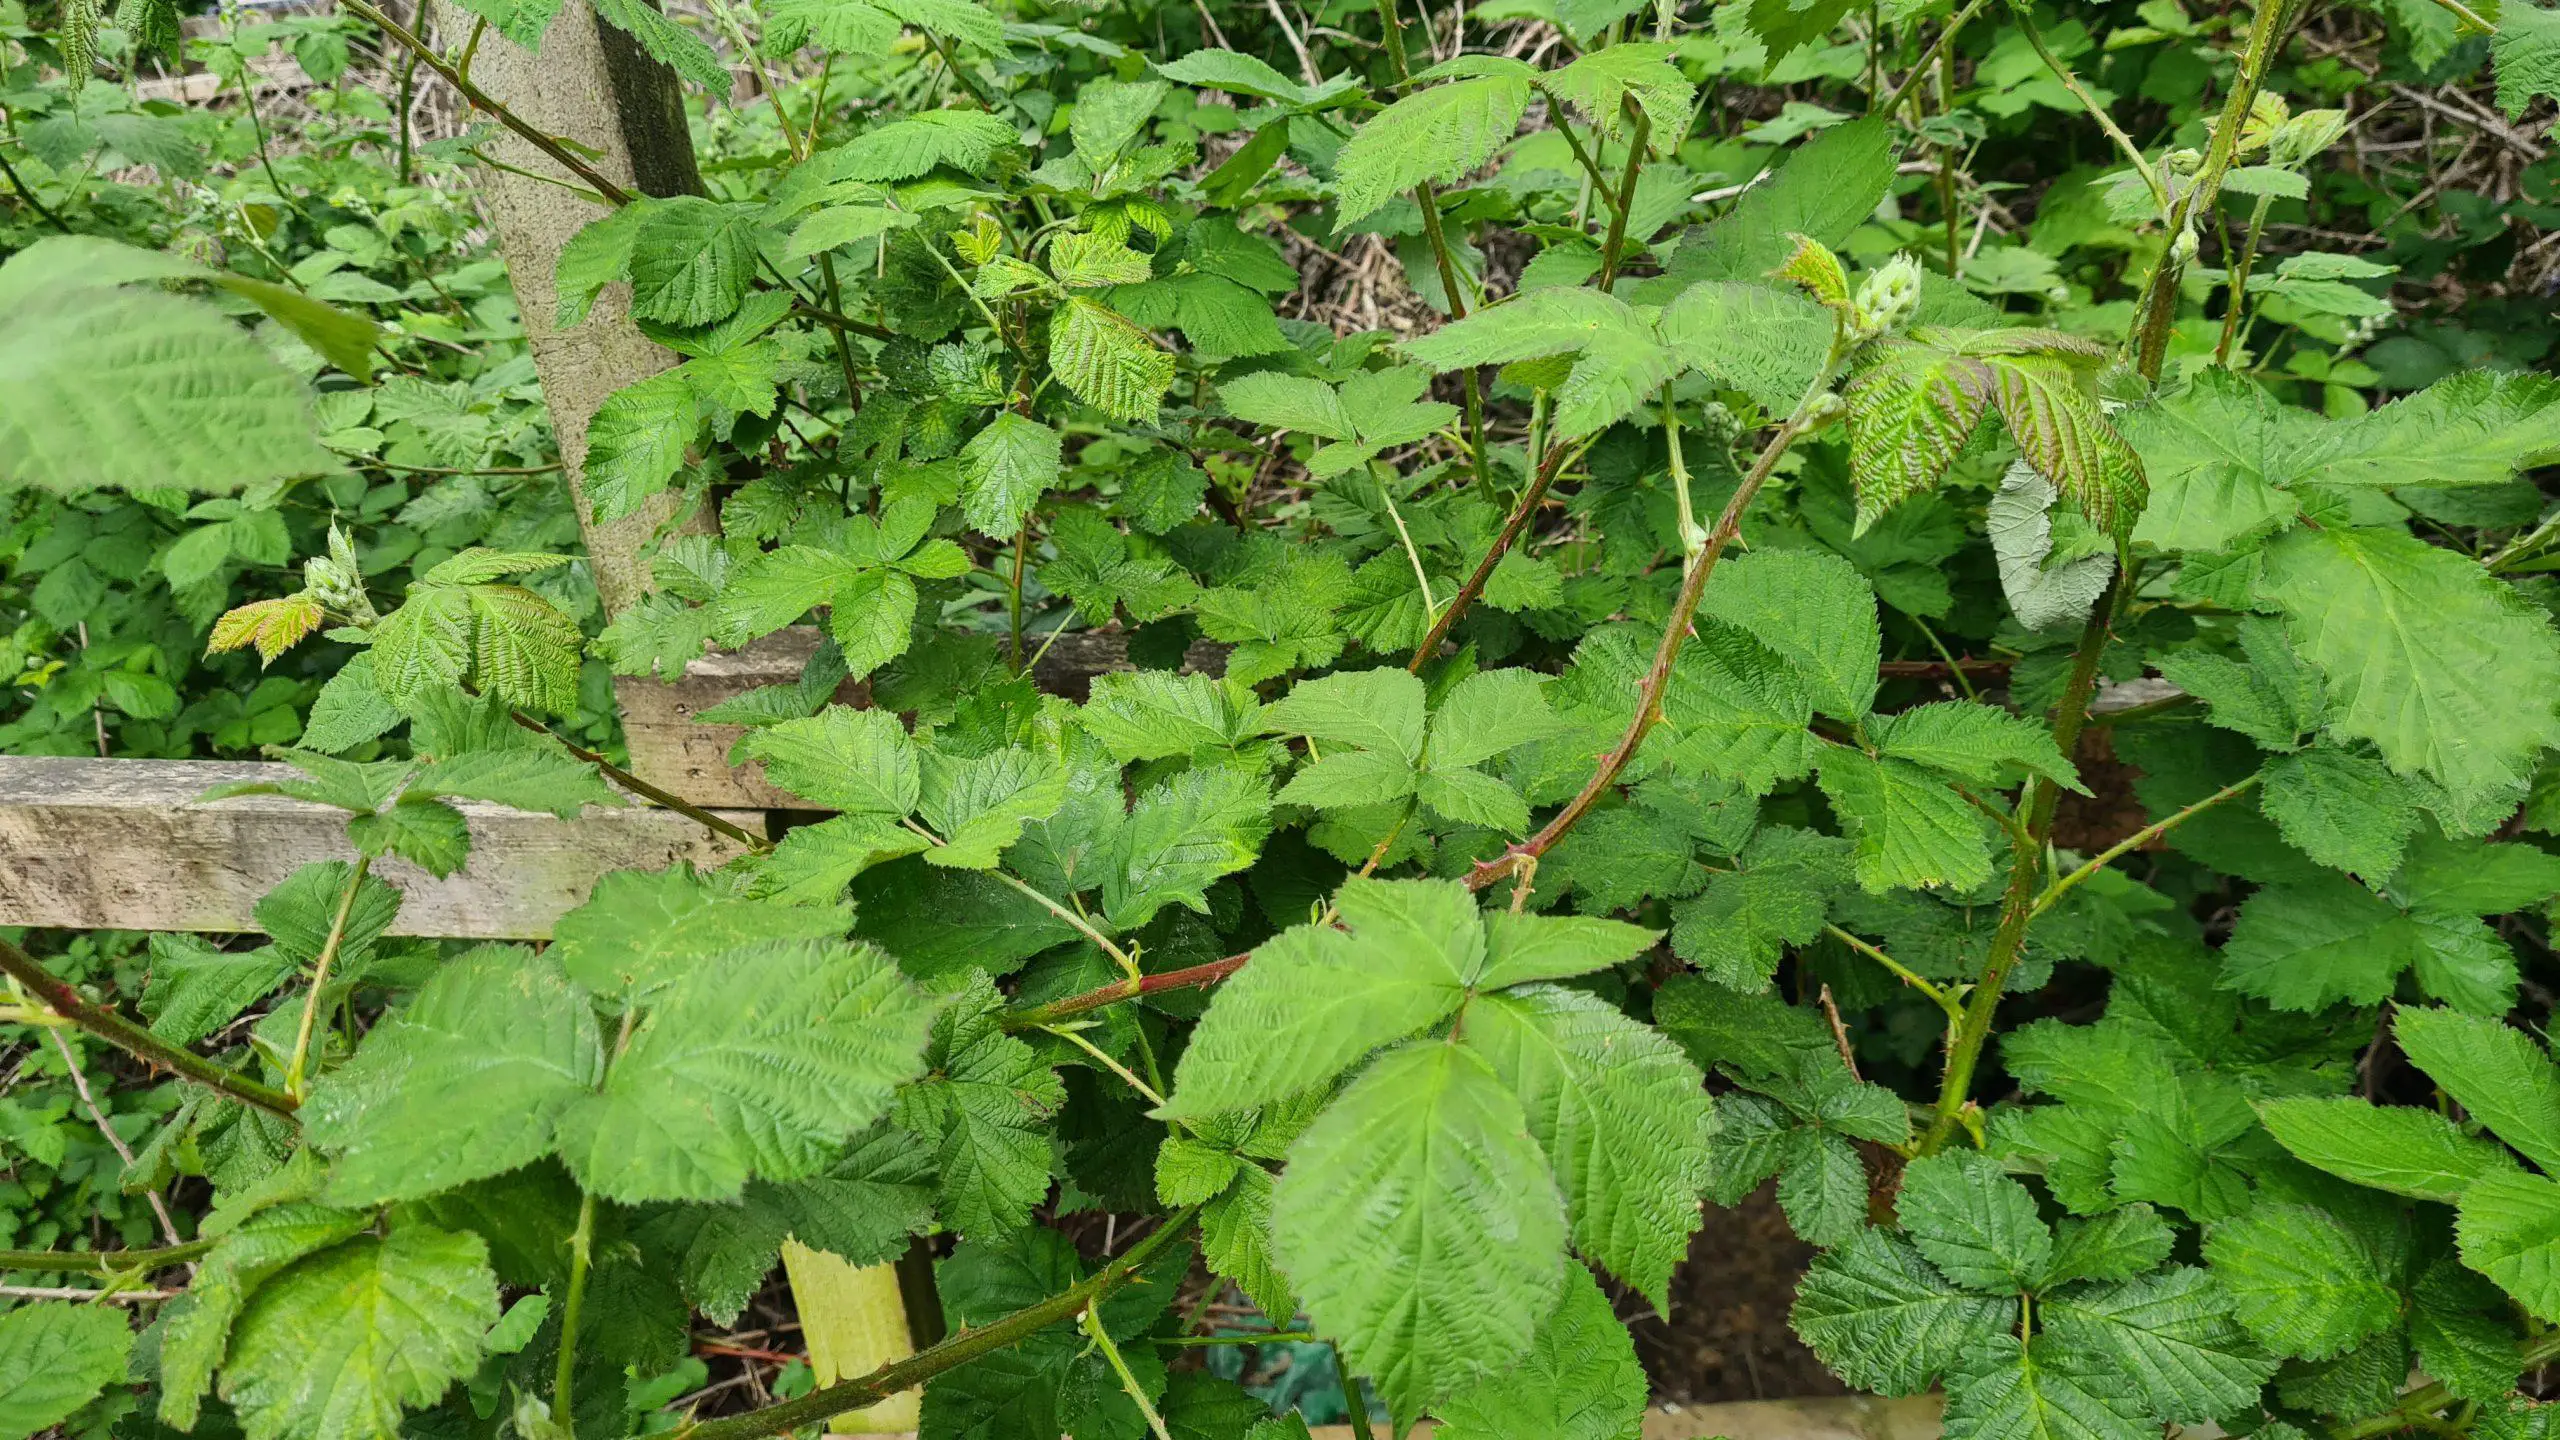 Brambles grow comfortably within a hedge and consume it from both sides and over the top of it